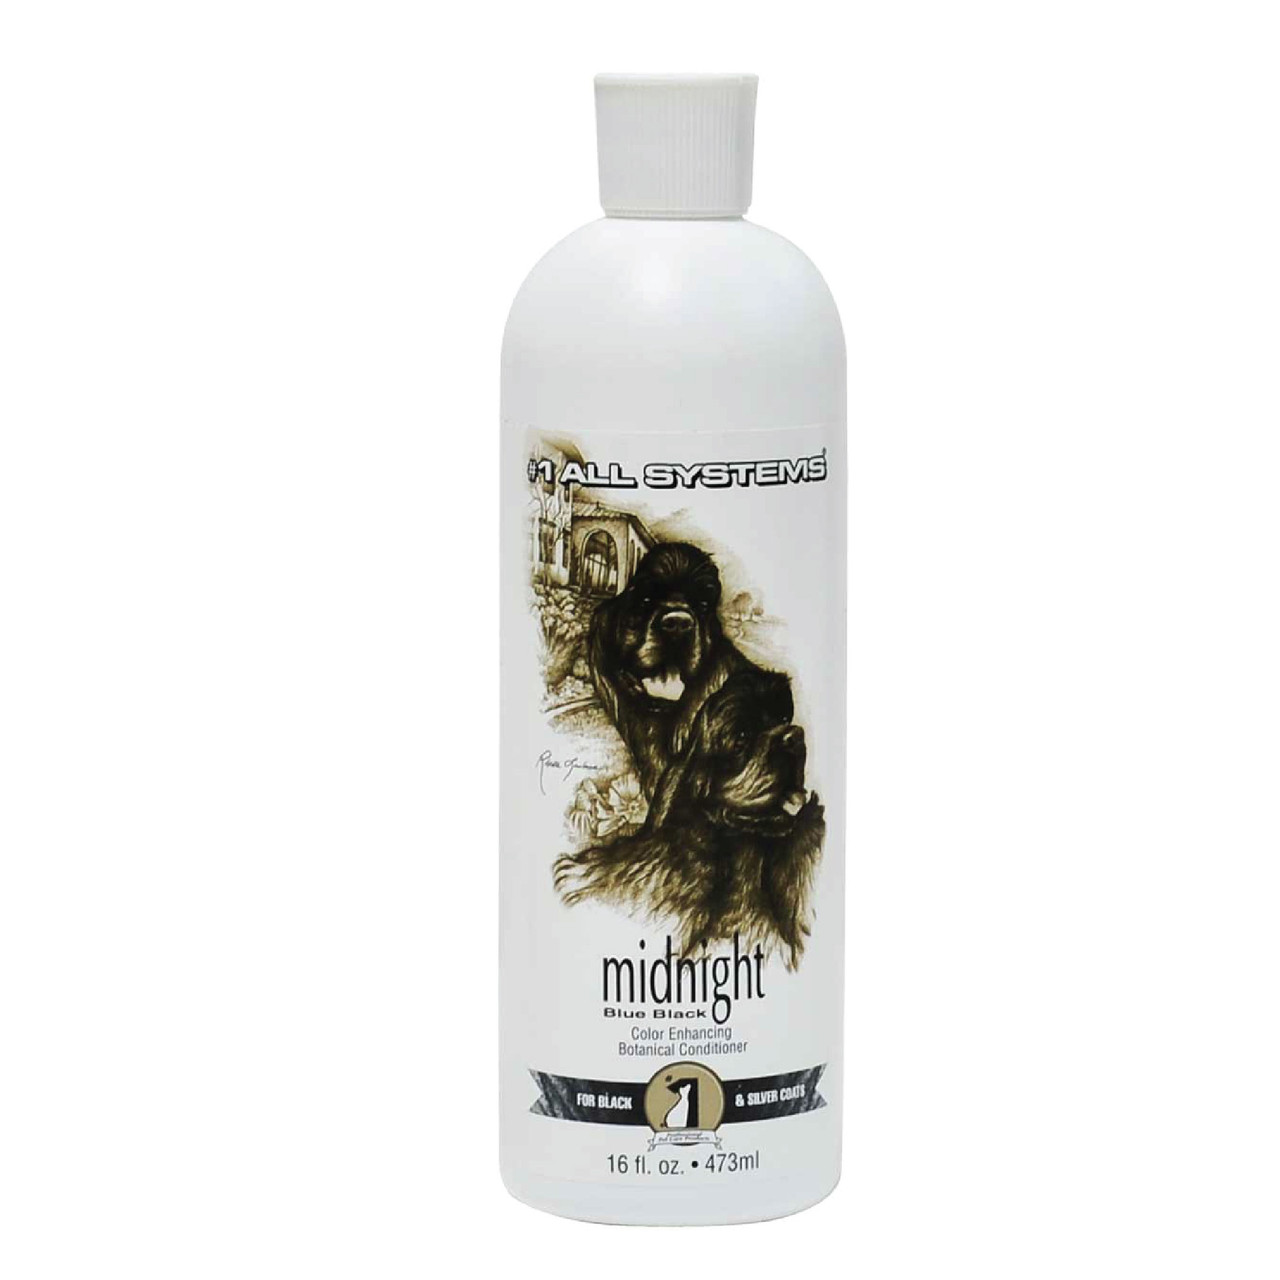 #1 All Systems Super Clean & Conditioning Shampoo